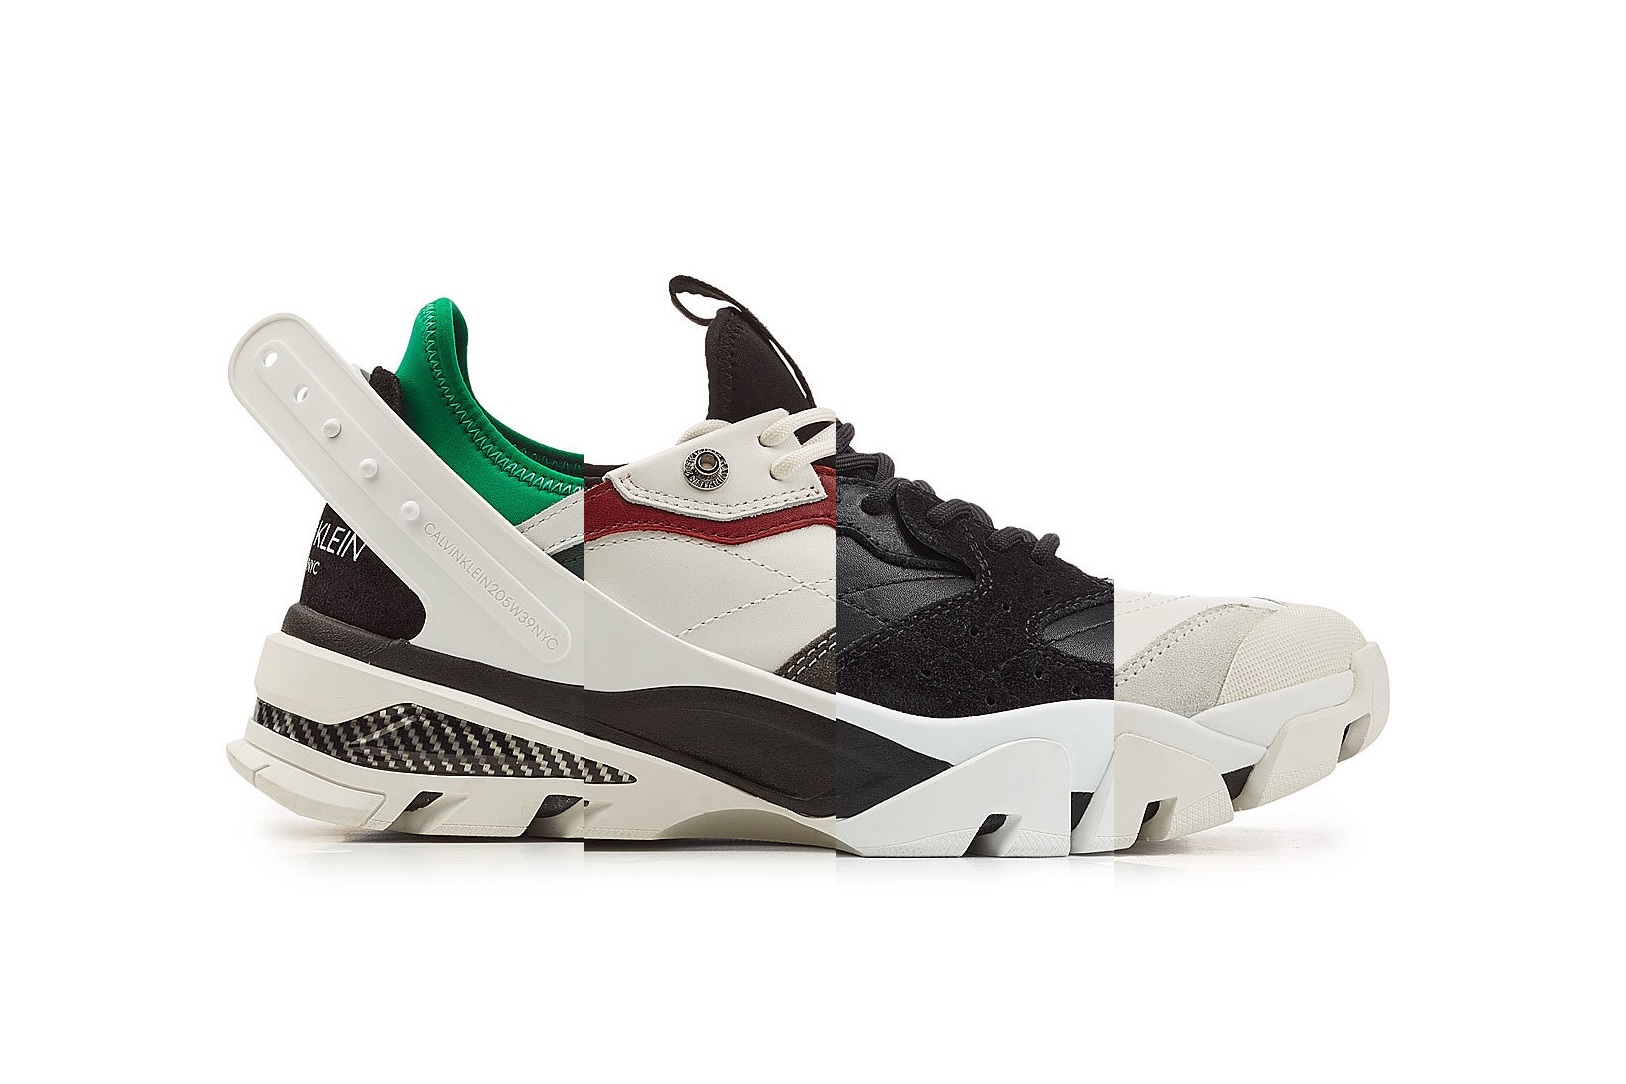 Calvin Klein’s 205W39NYC Line Takes on the Chunky Trend for Carlos 10 Sneakers